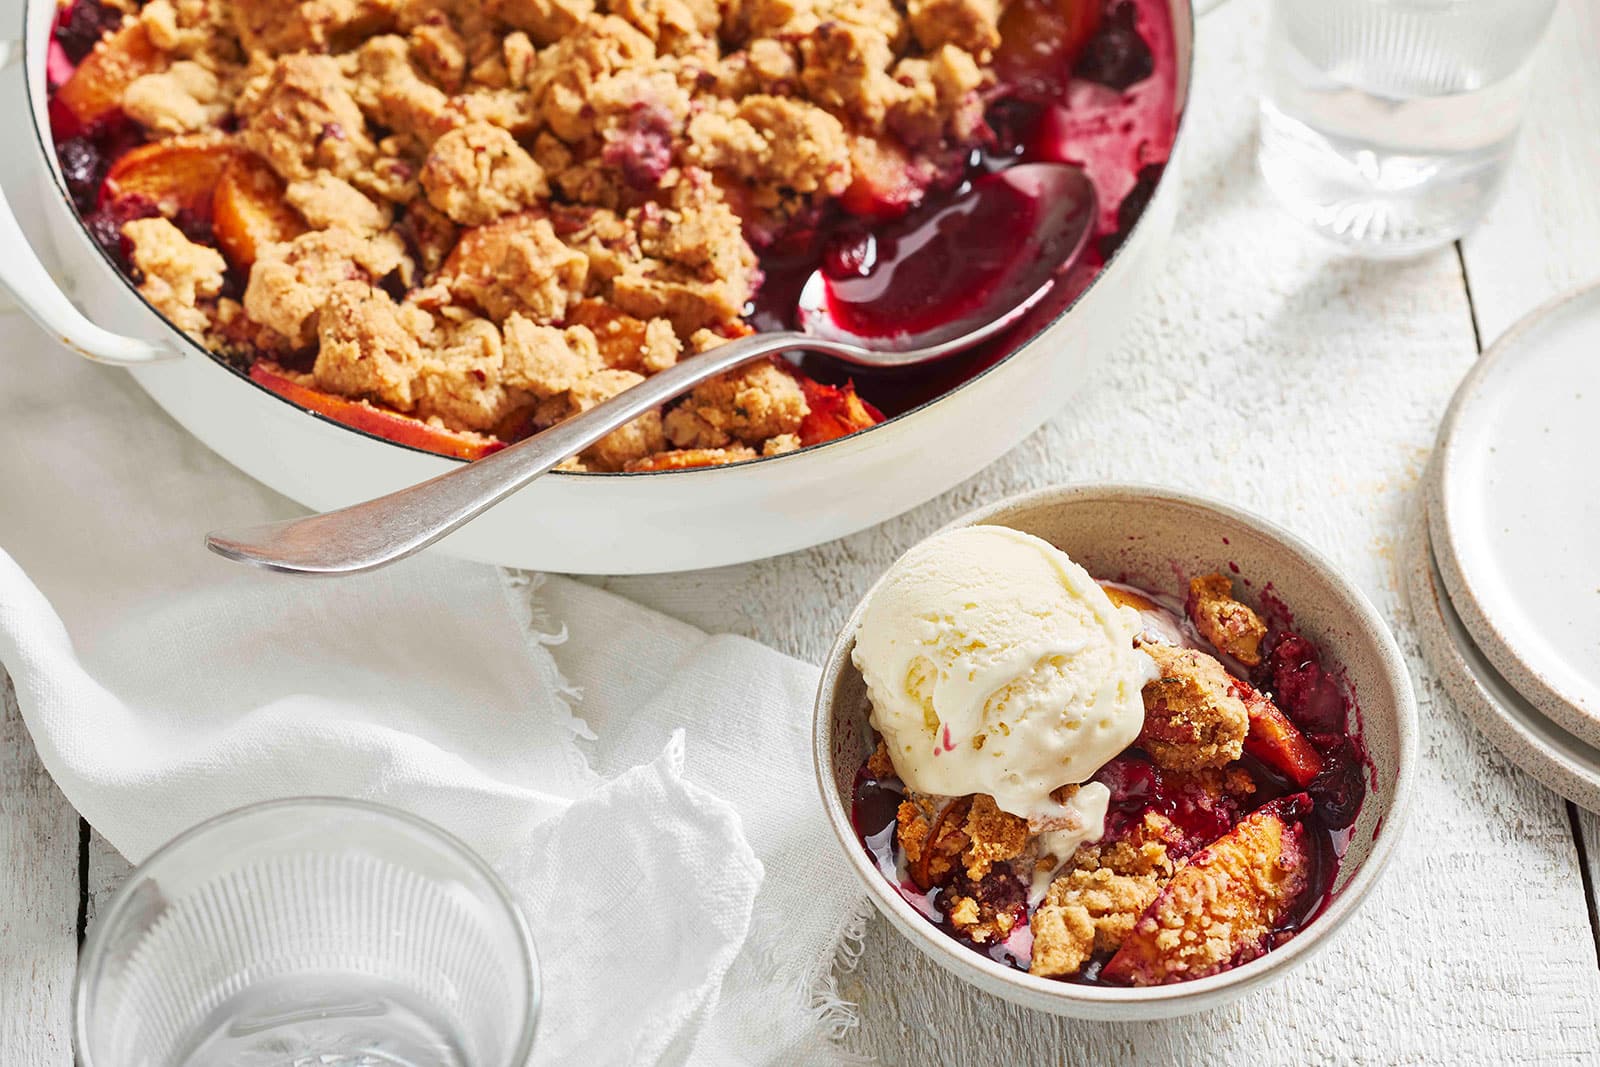 Barbecued Peach & Blueberry Streusel